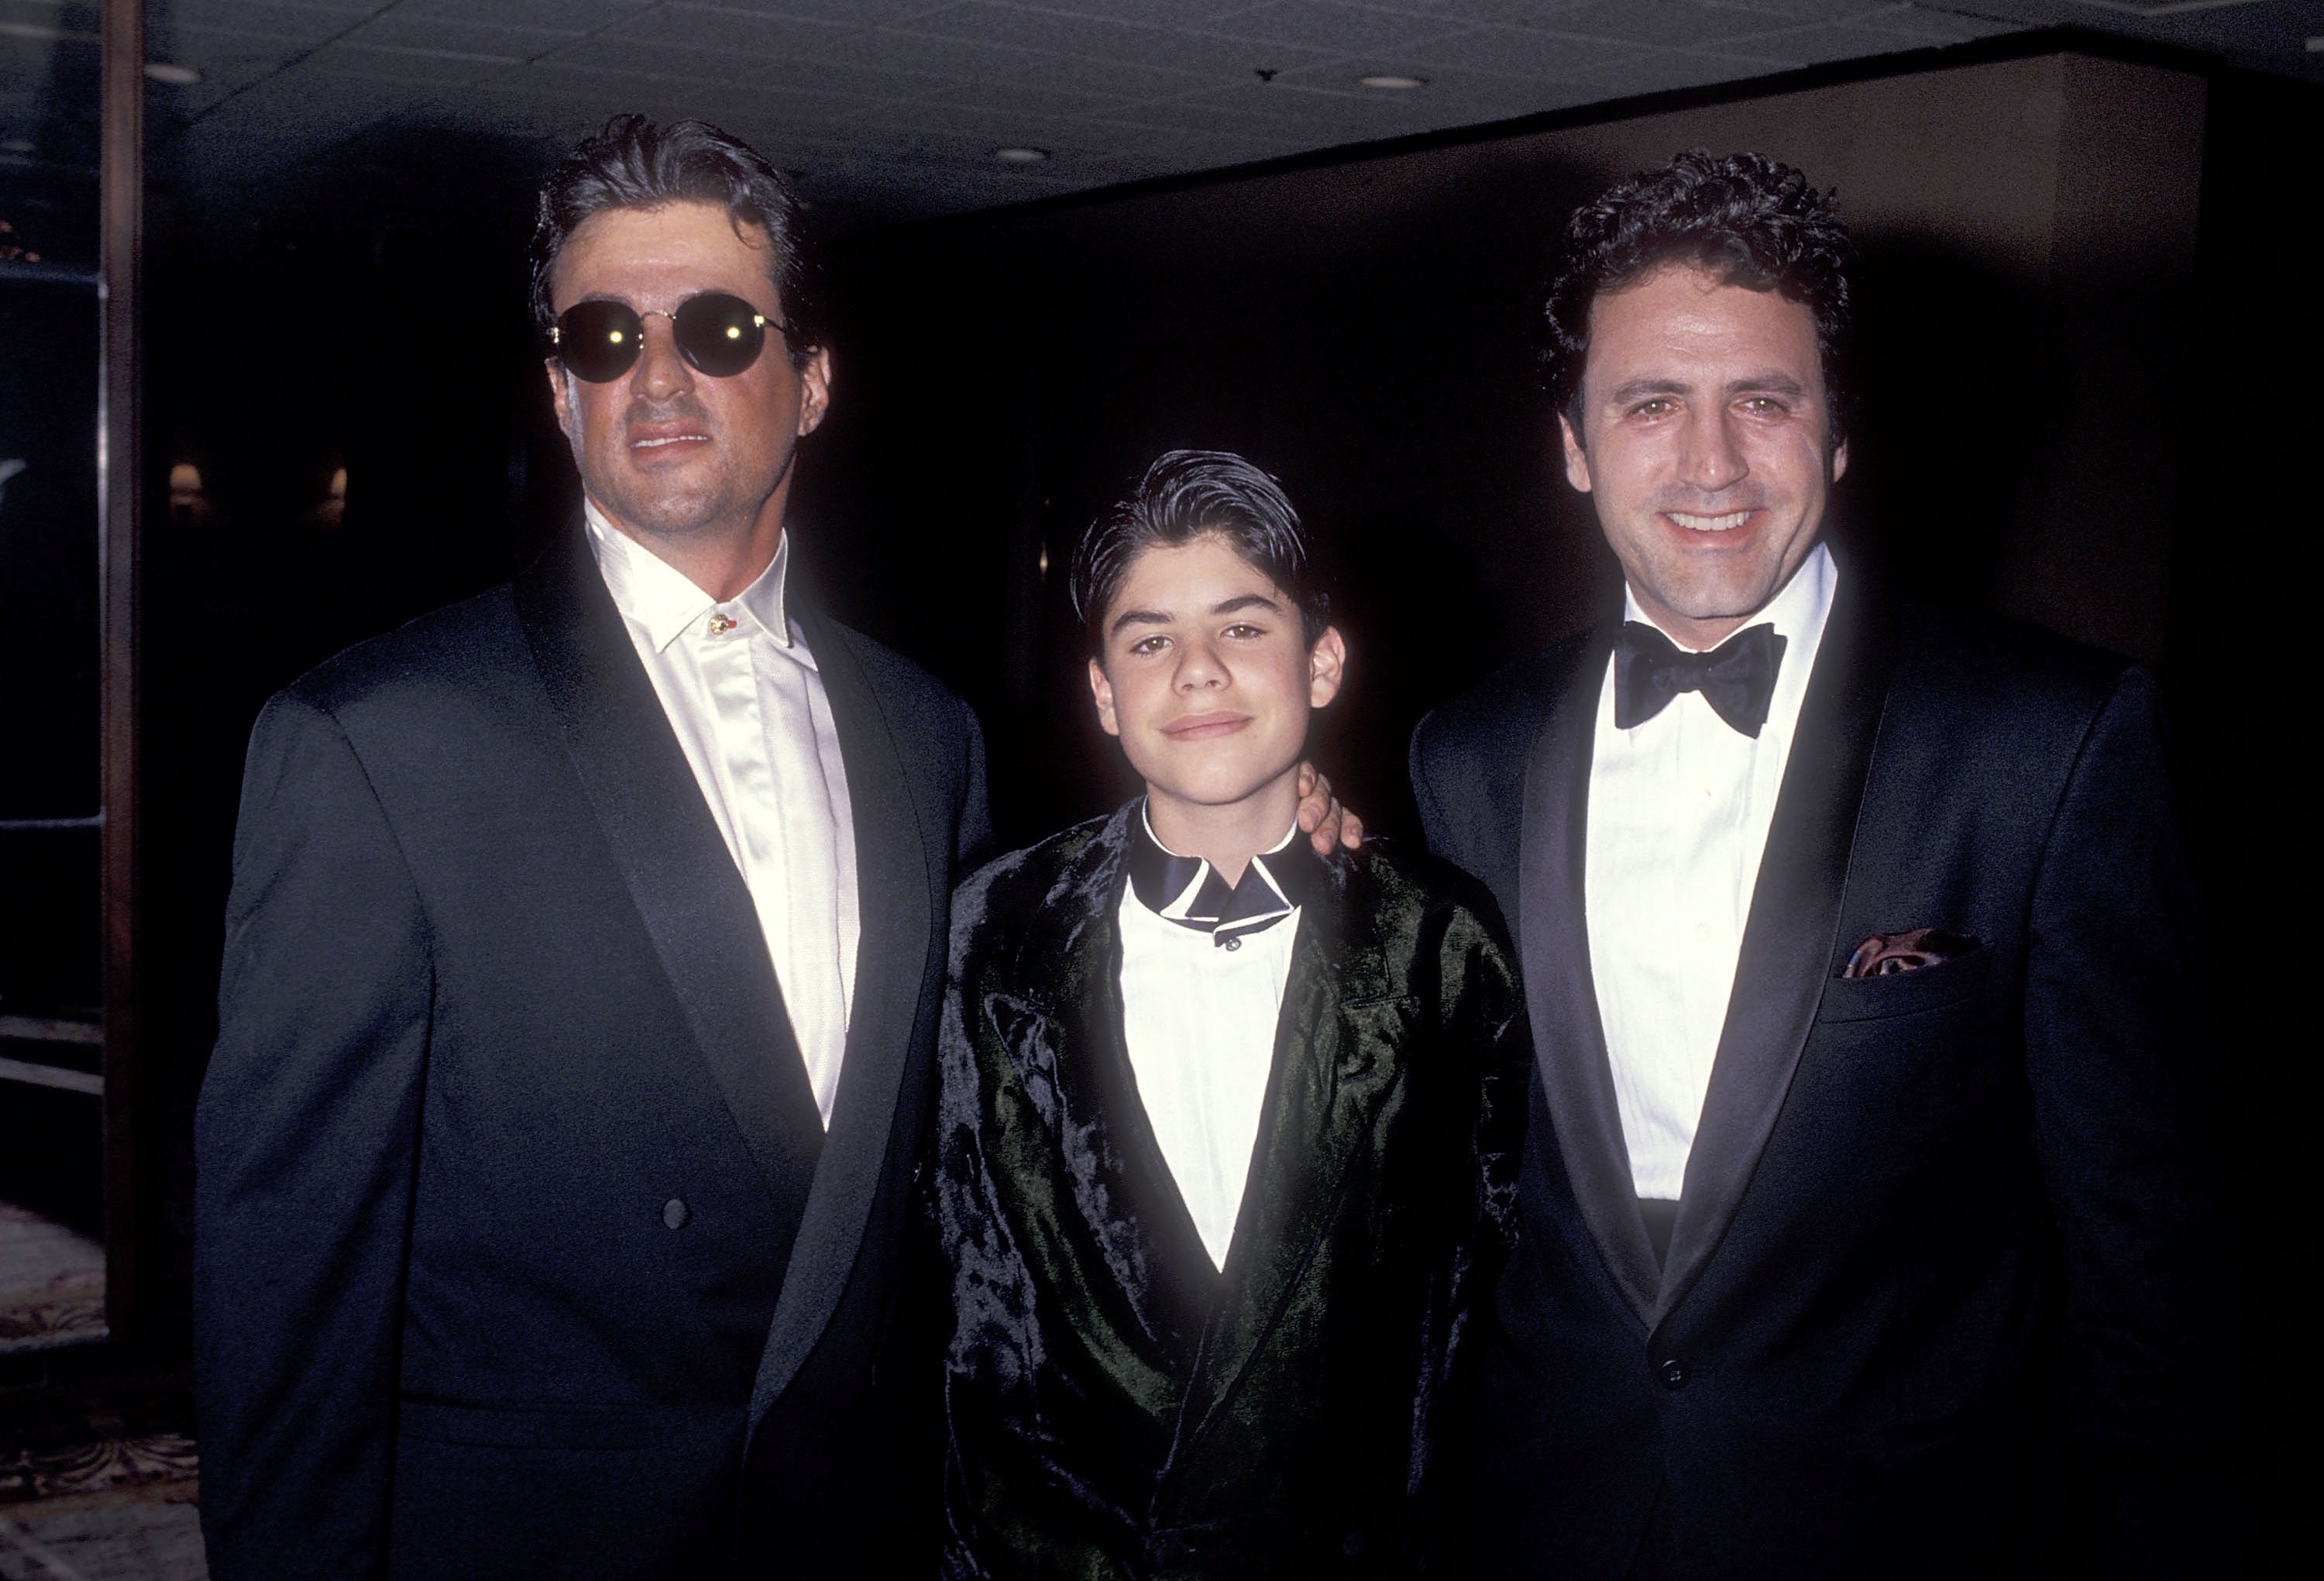 Sylvester Stallone, Sage Stallone and Frank Stallone during the California Fashion Industry Friends of AIDS Project Los Angeles Fifth Annual Fashion Show & Dinner Benefit Salute to Gianni Versace on February 13, 1991 at the Century Plaza Hotel in Century City, California. | Source: Getty Images